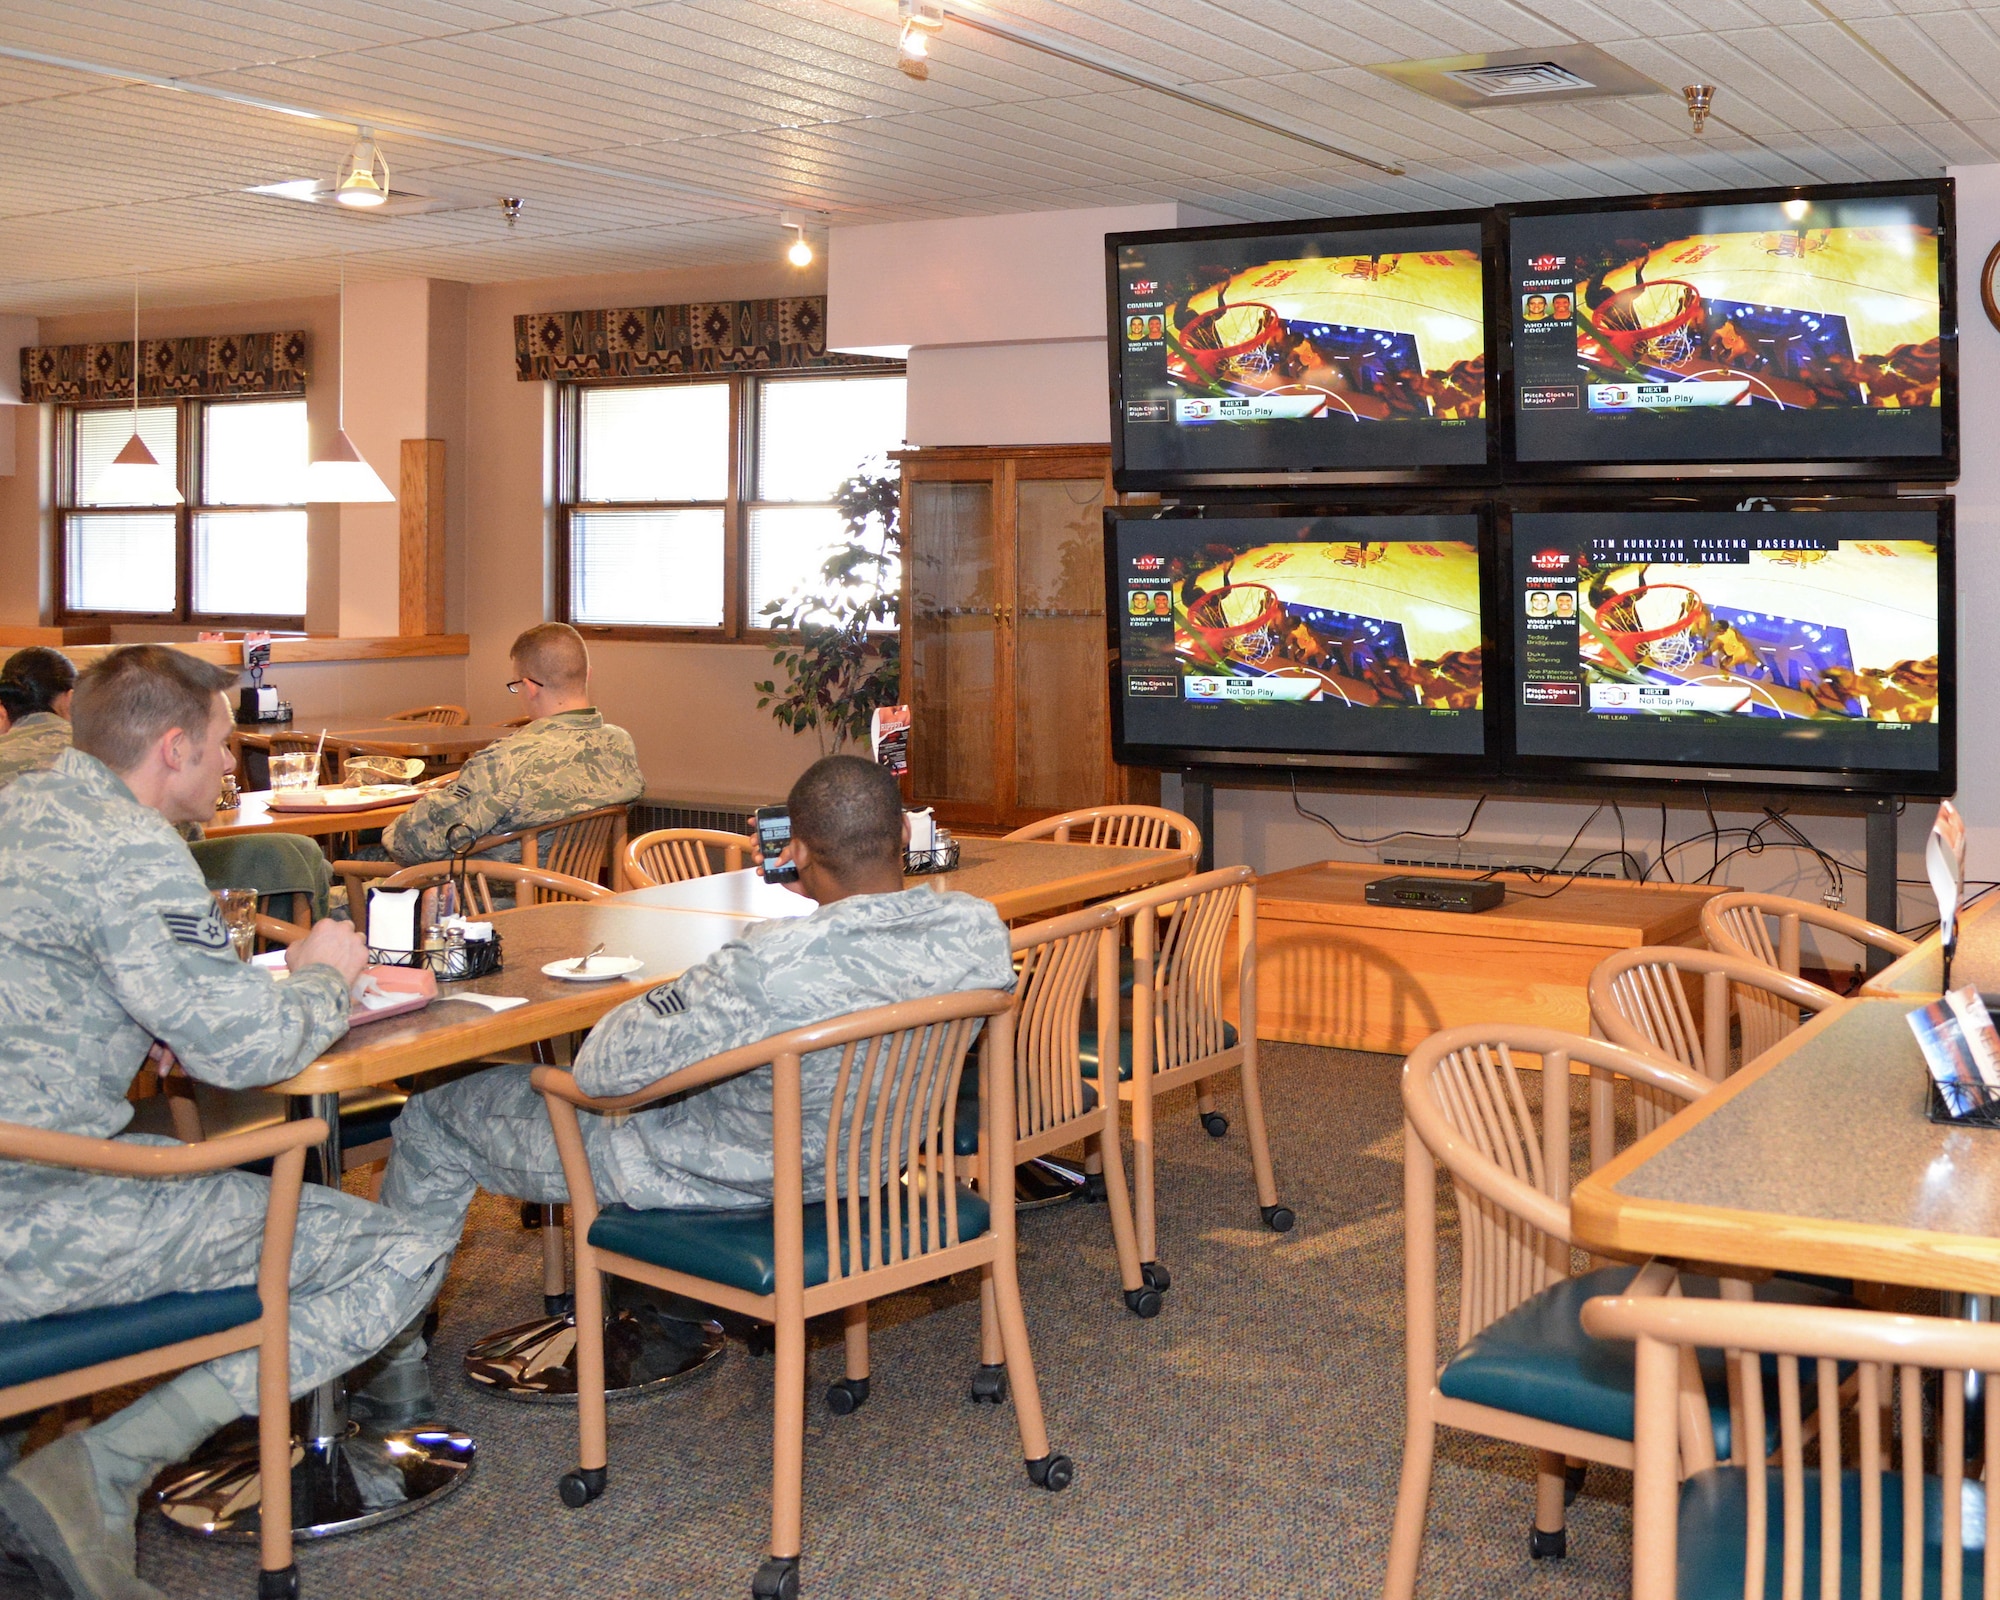 Kirtland’s military dining facility, the Thunderbird Inn, sports televisions around the dining area and portable speakers can be brought to the tables for customers
to listen to a specific TV. A conference room enlisted Airmen can use for meeting space, non-military computers in the dining area or Wi-Fi. The facility serves 600 or more meals a day. (Photo by Jamie Burnett)